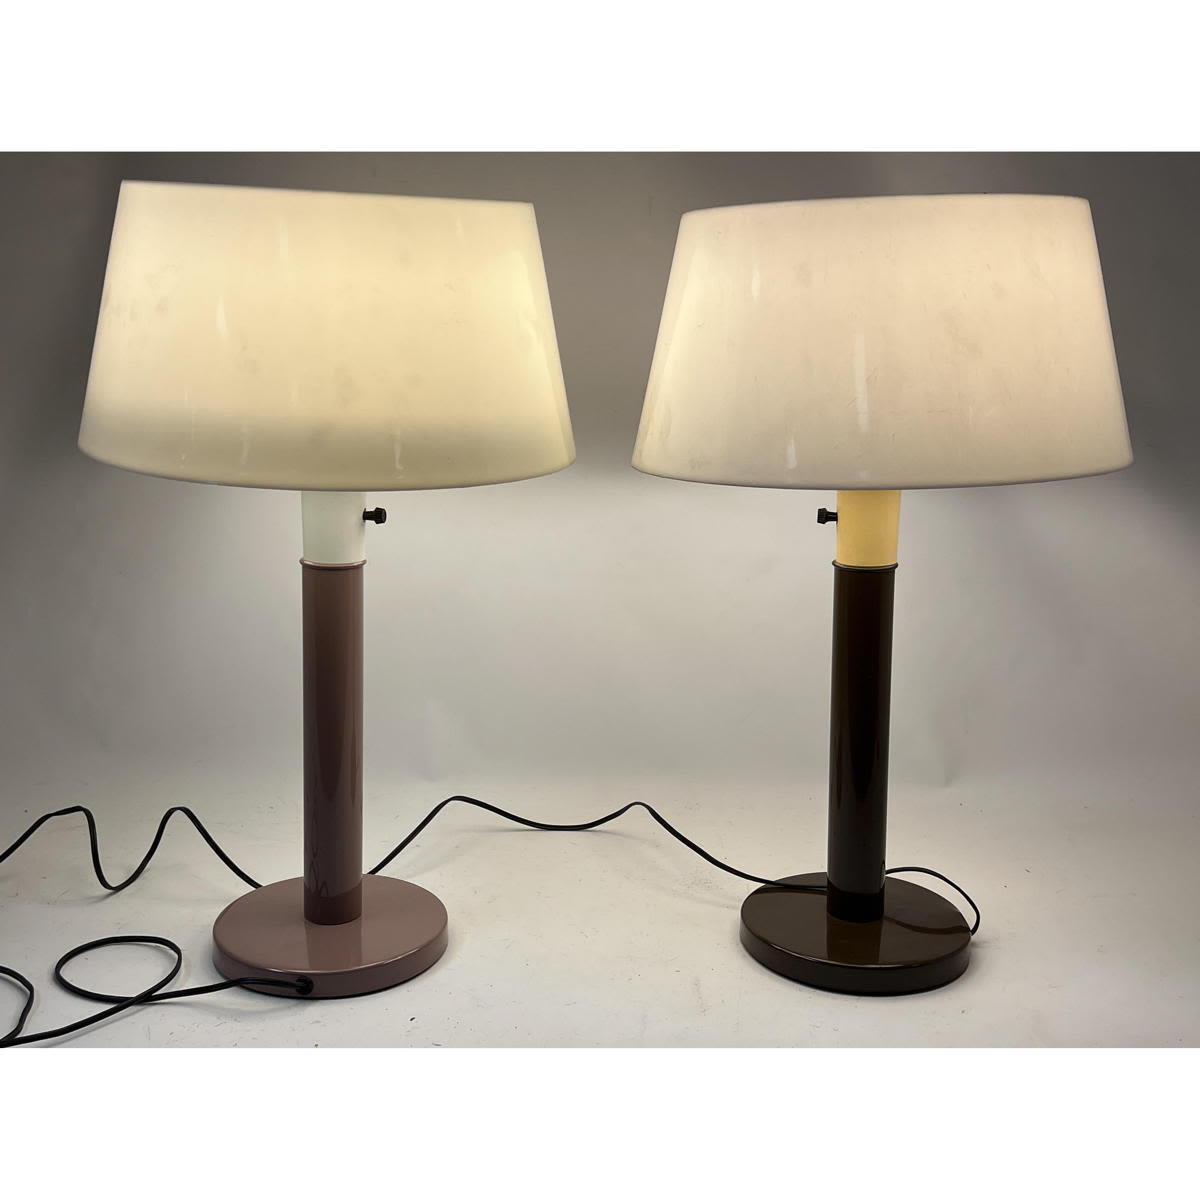 2pc Modernist Table Lamps One 2fe54e